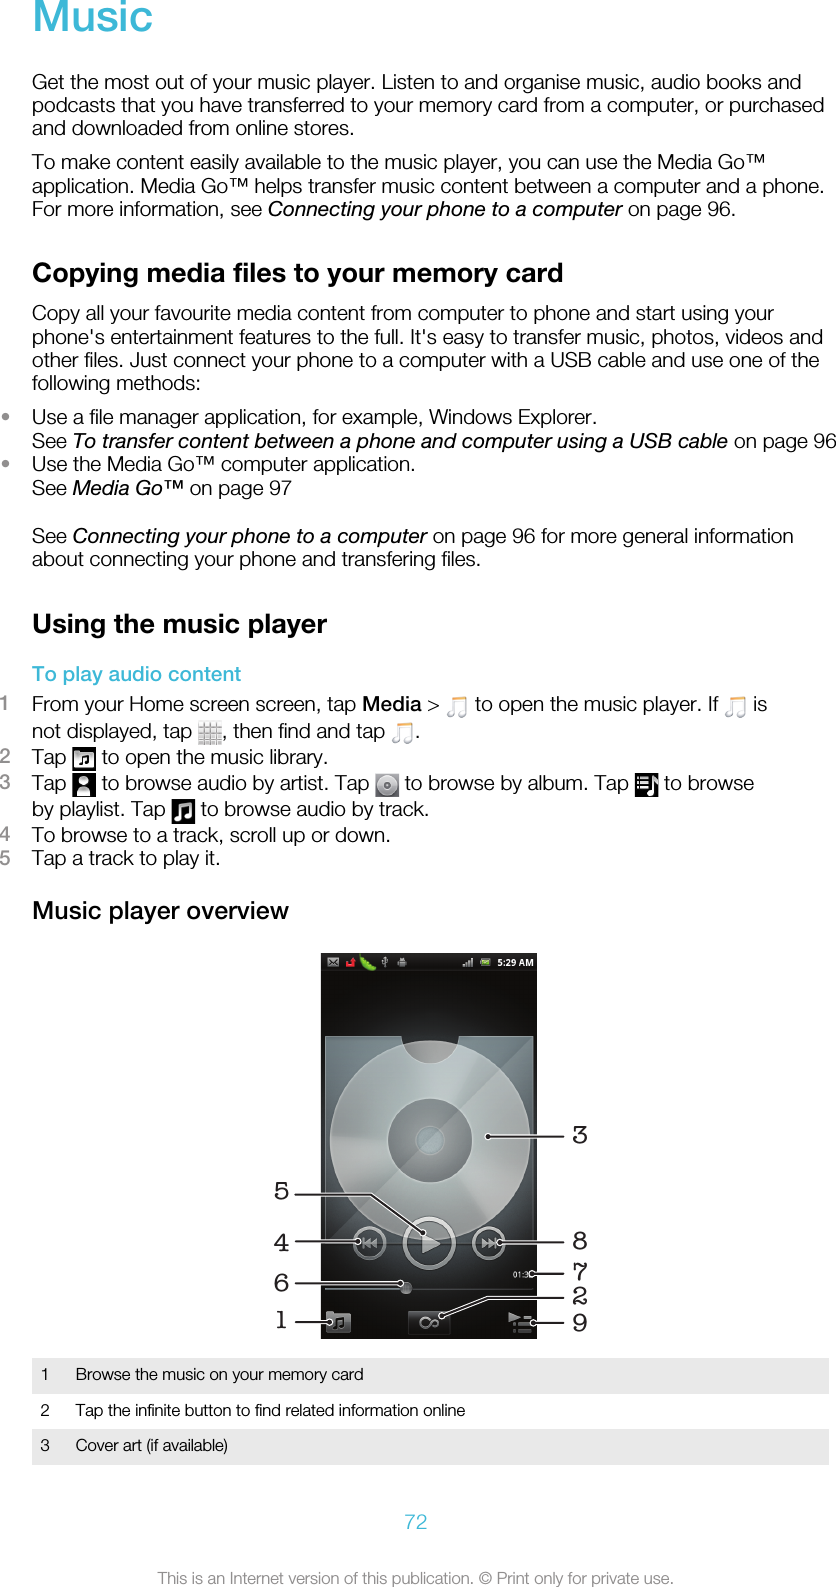 MusicGet the most out of your music player. Listen to and organise music, audio books andpodcasts that you have transferred to your memory card from a computer, or purchasedand downloaded from online stores.To make content easily available to the music player, you can use the Media Go™application. Media Go™ helps transfer music content between a computer and a phone.For more information, see Connecting your phone to a computer on page 96.Copying media files to your memory cardCopy all your favourite media content from computer to phone and start using yourphone&apos;s entertainment features to the full. It&apos;s easy to transfer music, photos, videos andother files. Just connect your phone to a computer with a USB cable and use one of thefollowing methods:•Use a file manager application, for example, Windows Explorer.See To transfer content between a phone and computer using a USB cable on page 96•Use the Media Go™ computer application.See Media Go™ on page 97See Connecting your phone to a computer on page 96 for more general informationabout connecting your phone and transfering files.Using the music playerTo play audio content1From your Home screen screen, tap Media &gt;   to open the music player. If   isnot displayed, tap  , then find and tap  .2Tap   to open the music library.3Tap   to browse audio by artist. Tap   to browse by album. Tap   to browseby playlist. Tap   to browse audio by track.4To browse to a track, scroll up or down.5Tap a track to play it.Music player overview1629458371Browse the music on your memory card2 Tap the infinite button to find related information online3 Cover art (if available)72This is an Internet version of this publication. © Print only for private use.